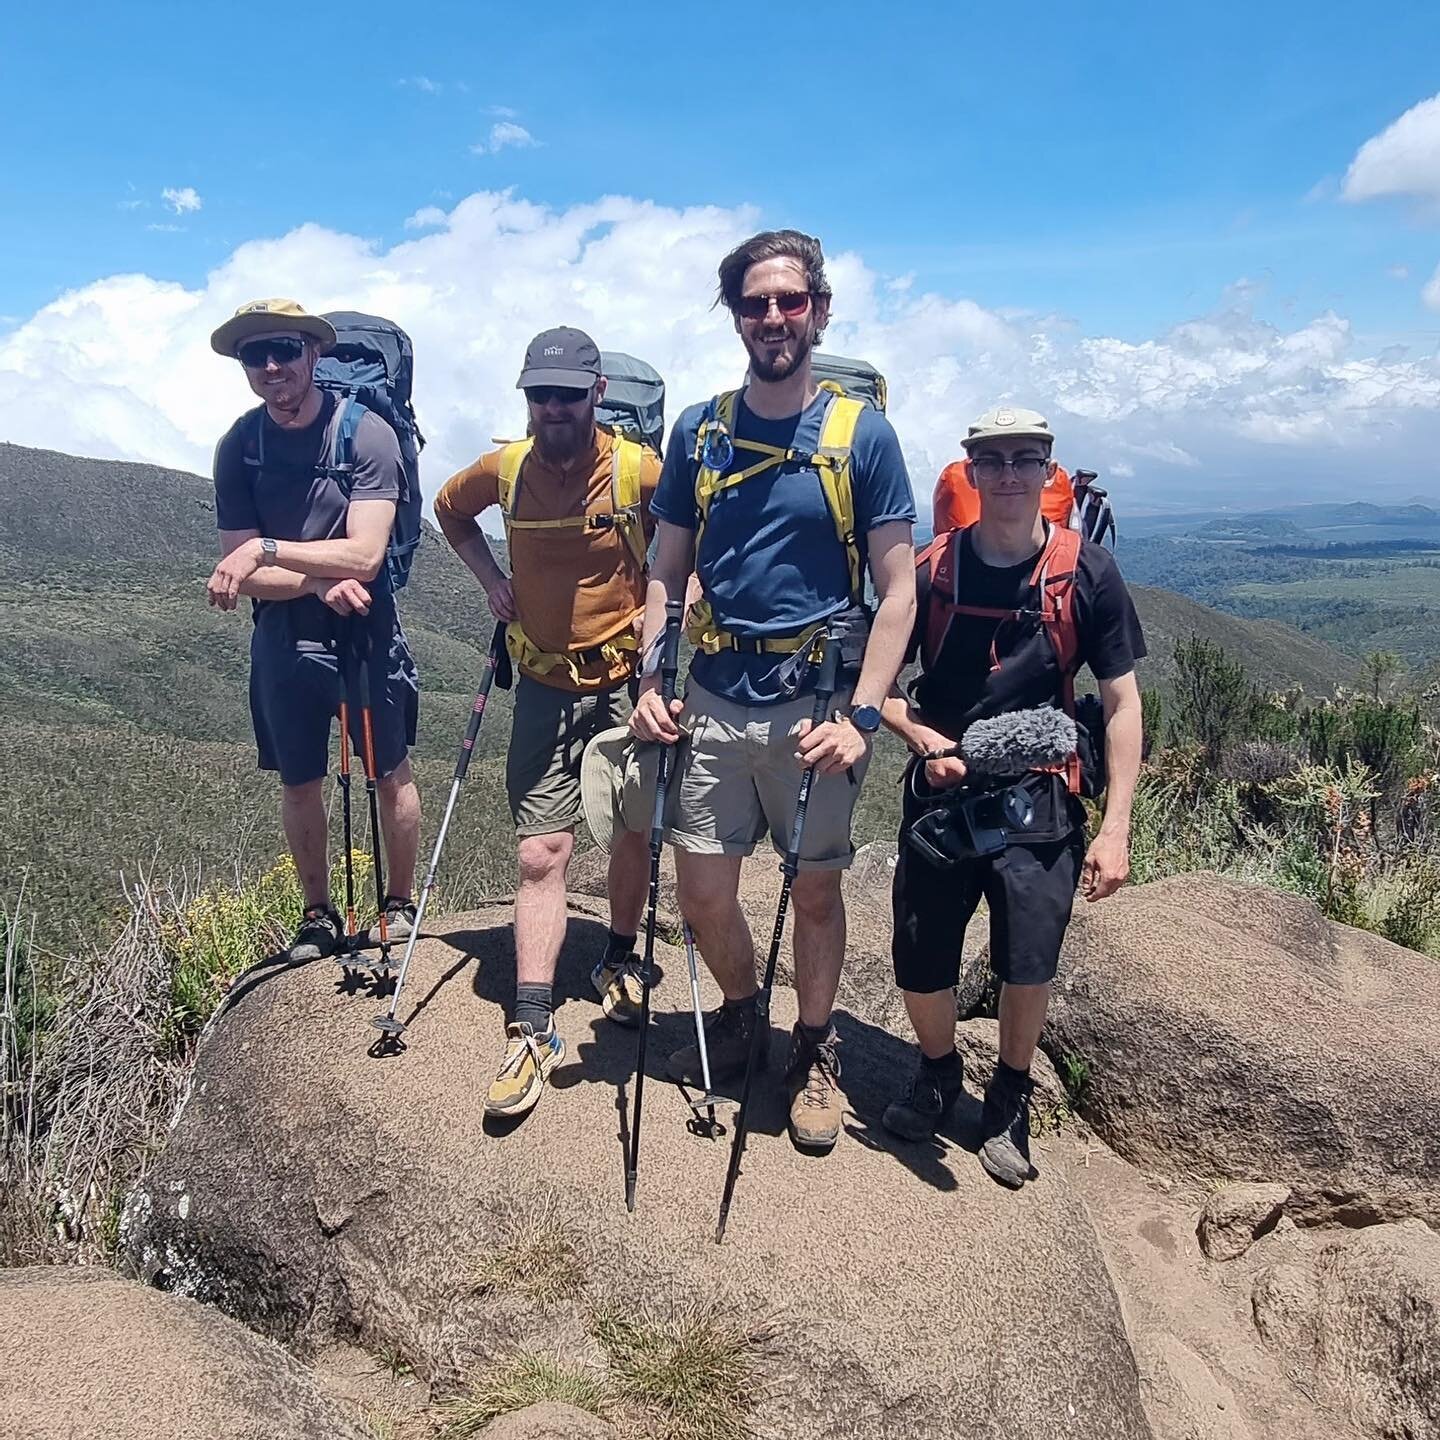 A team photo halfway up to the Kilimanjaro Shira Camp 1 on the Lemosho route. Just had lunch, so everyone&rsquo;s happy 😎  #TheLastRideProject

@kilimanjaro.dreamers 
#climatechange #mountaineering #summit #expedition #kilimanjaro #altitude #documen